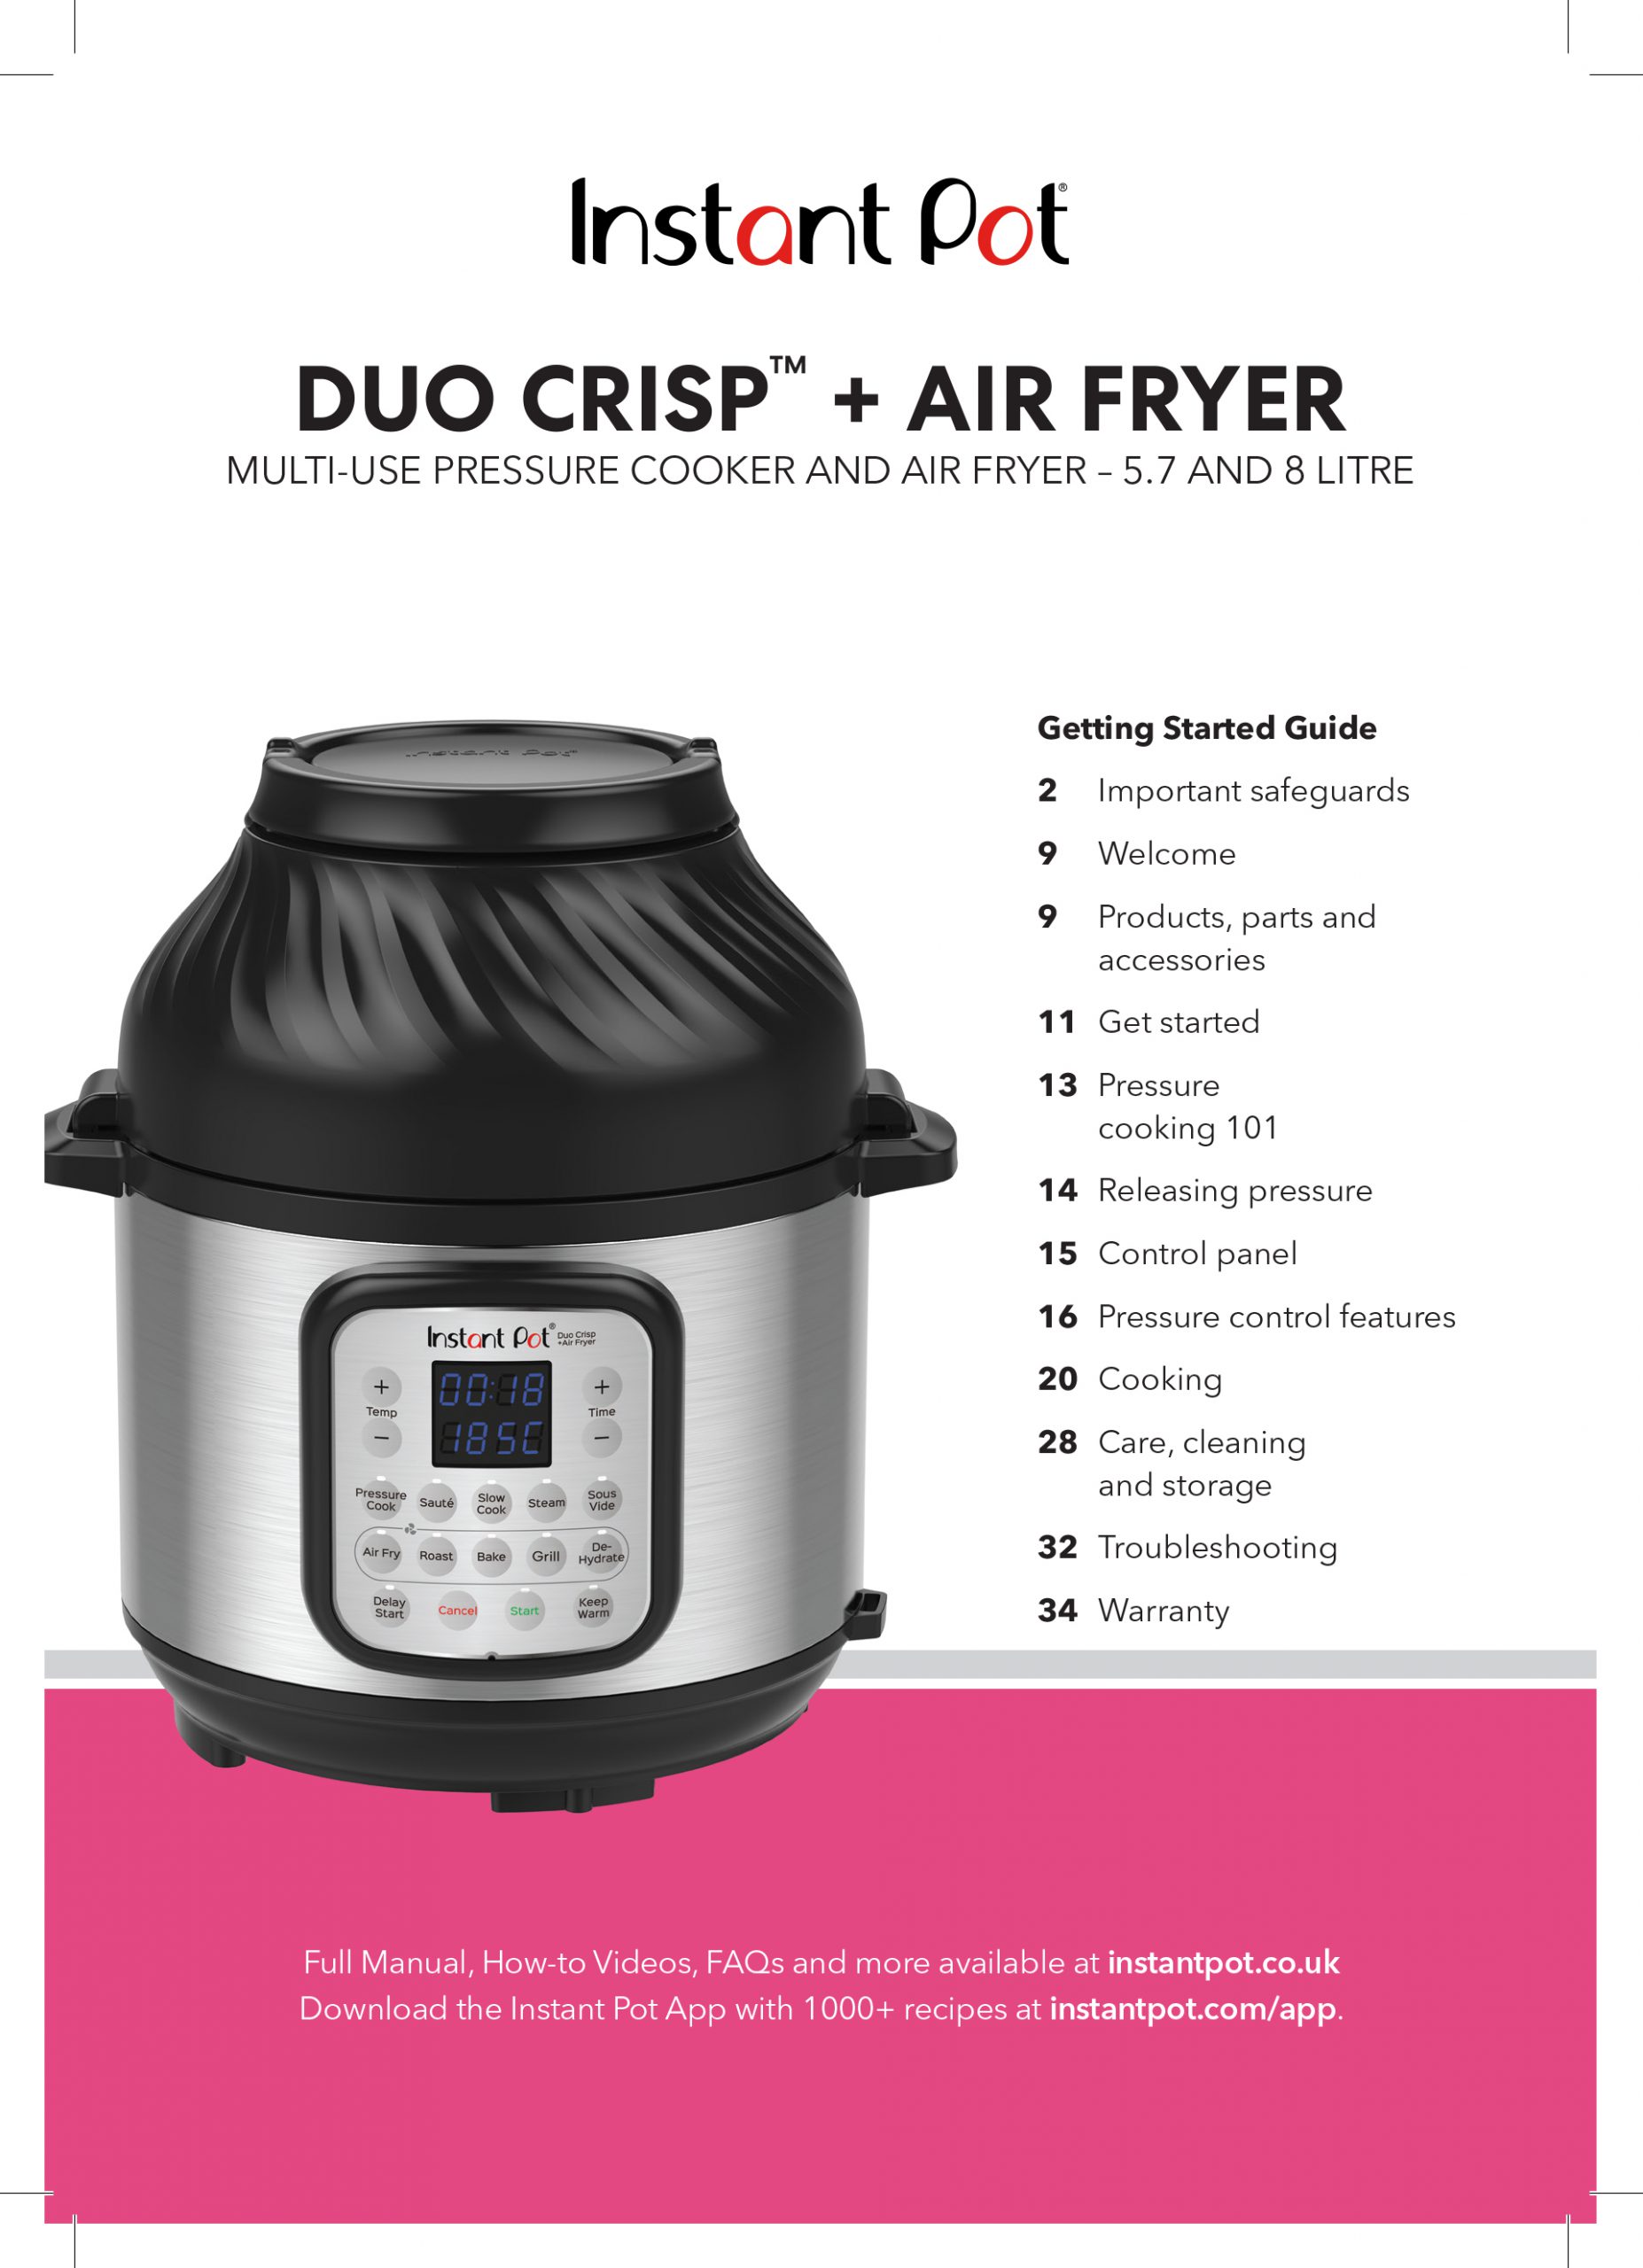 Instant Pot Duo Crisp Pressure Cooker 11 in 1, 8 Qt with Air Fryer, Roast,  Bake, Dehydrate and more & Genuine Instant Pot Tempered Glass lid, Clear 10